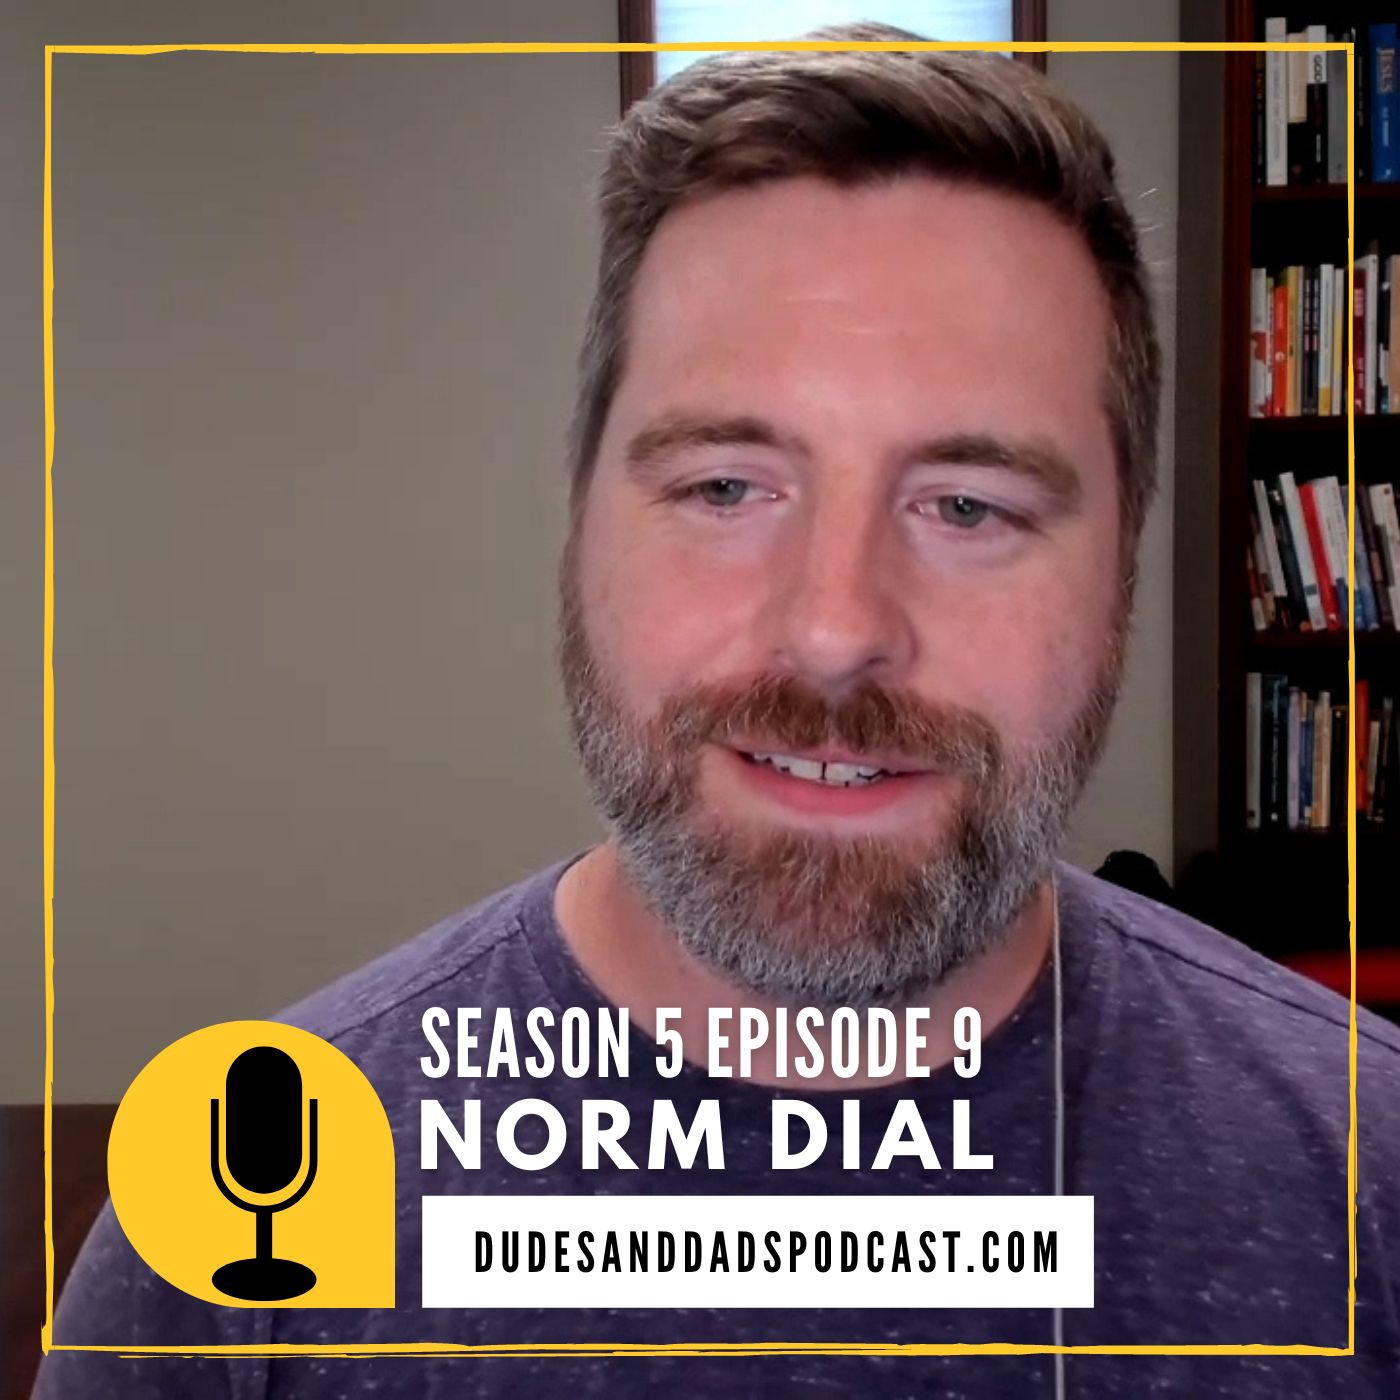 Norm Dial: What I’ve Learned From My Kids